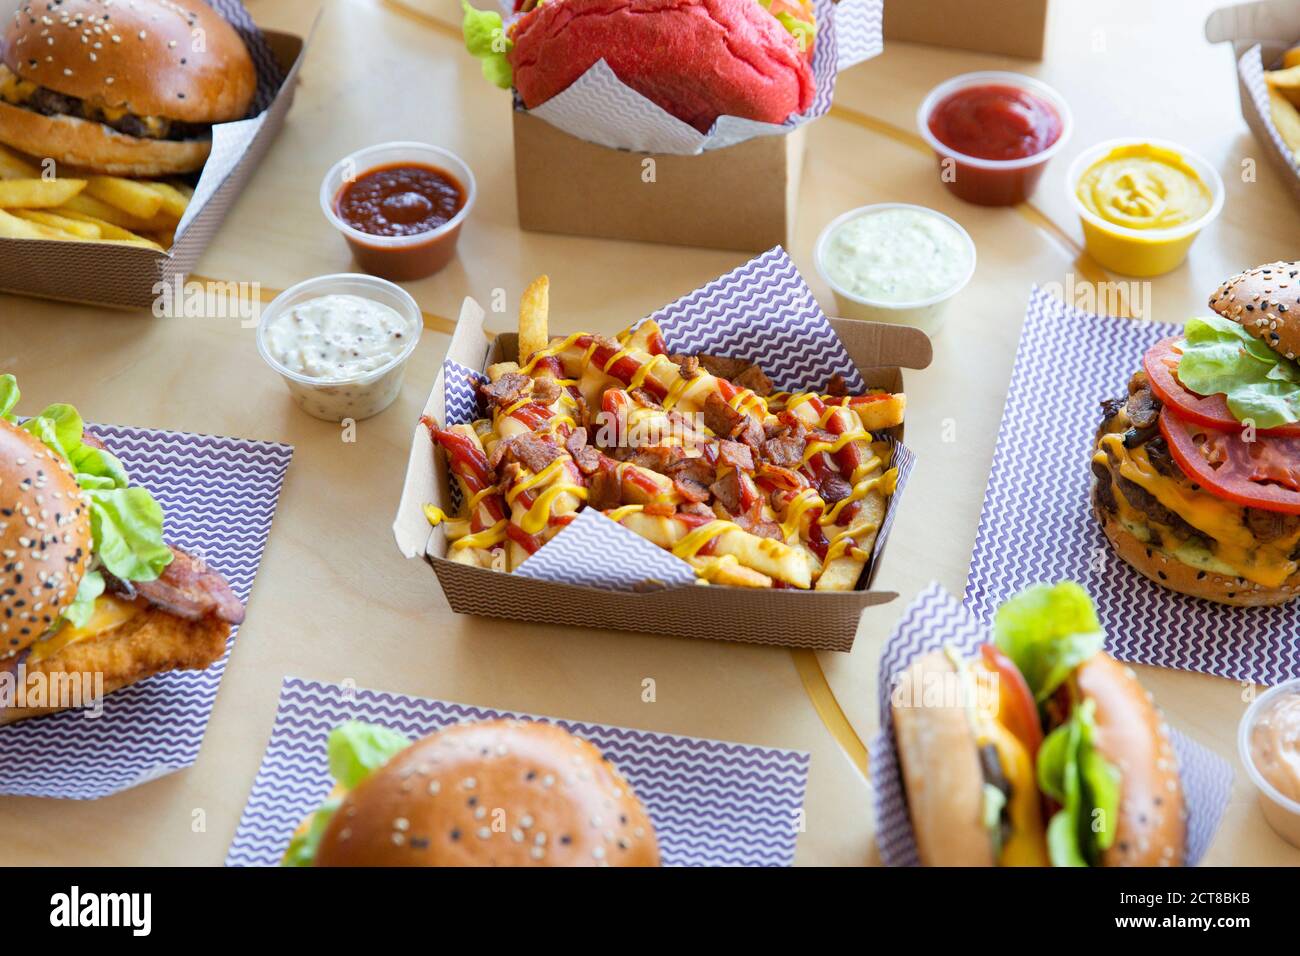 Burger restaurant layout with cheese & bacon loaded fries placed on light wooden surface. Stock Photo